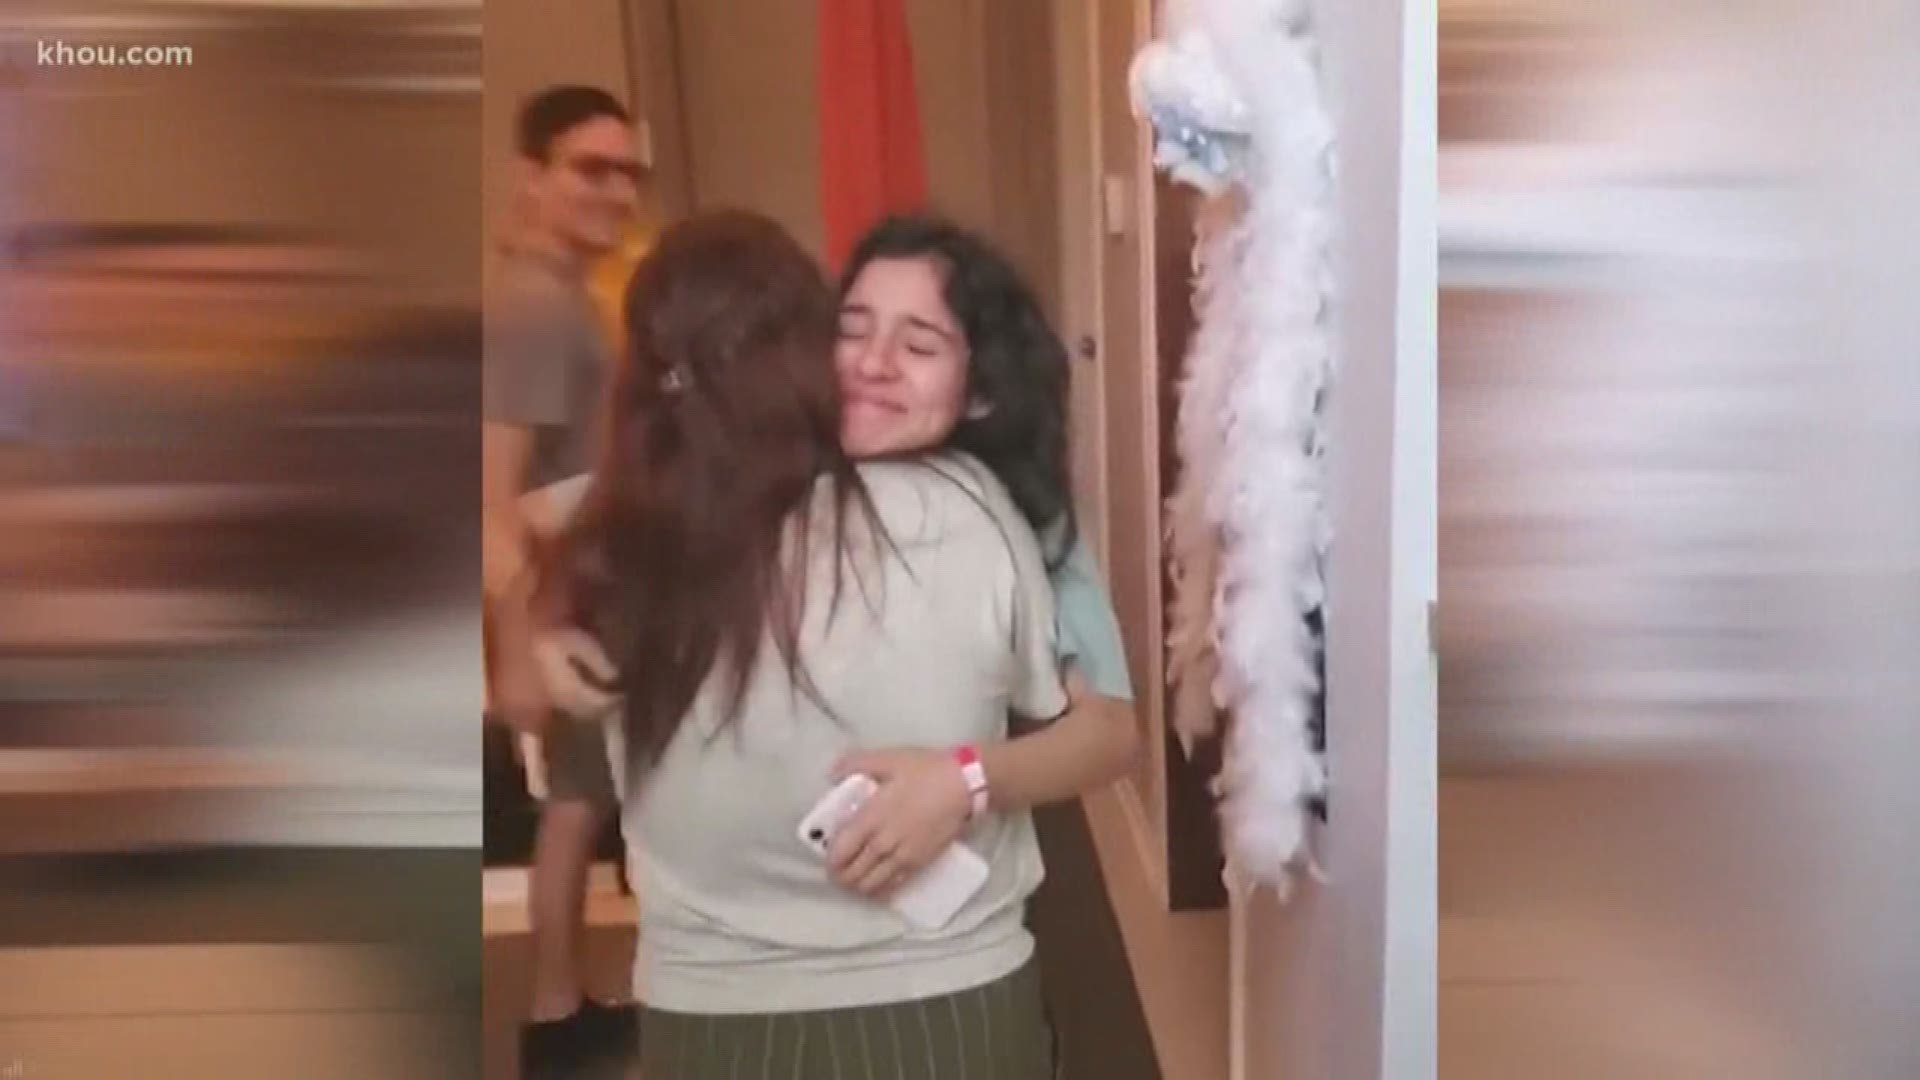 A Houston teen whose prom was canceled due to the COVID-19 pandemic was gifted an amazing surprise by her family.